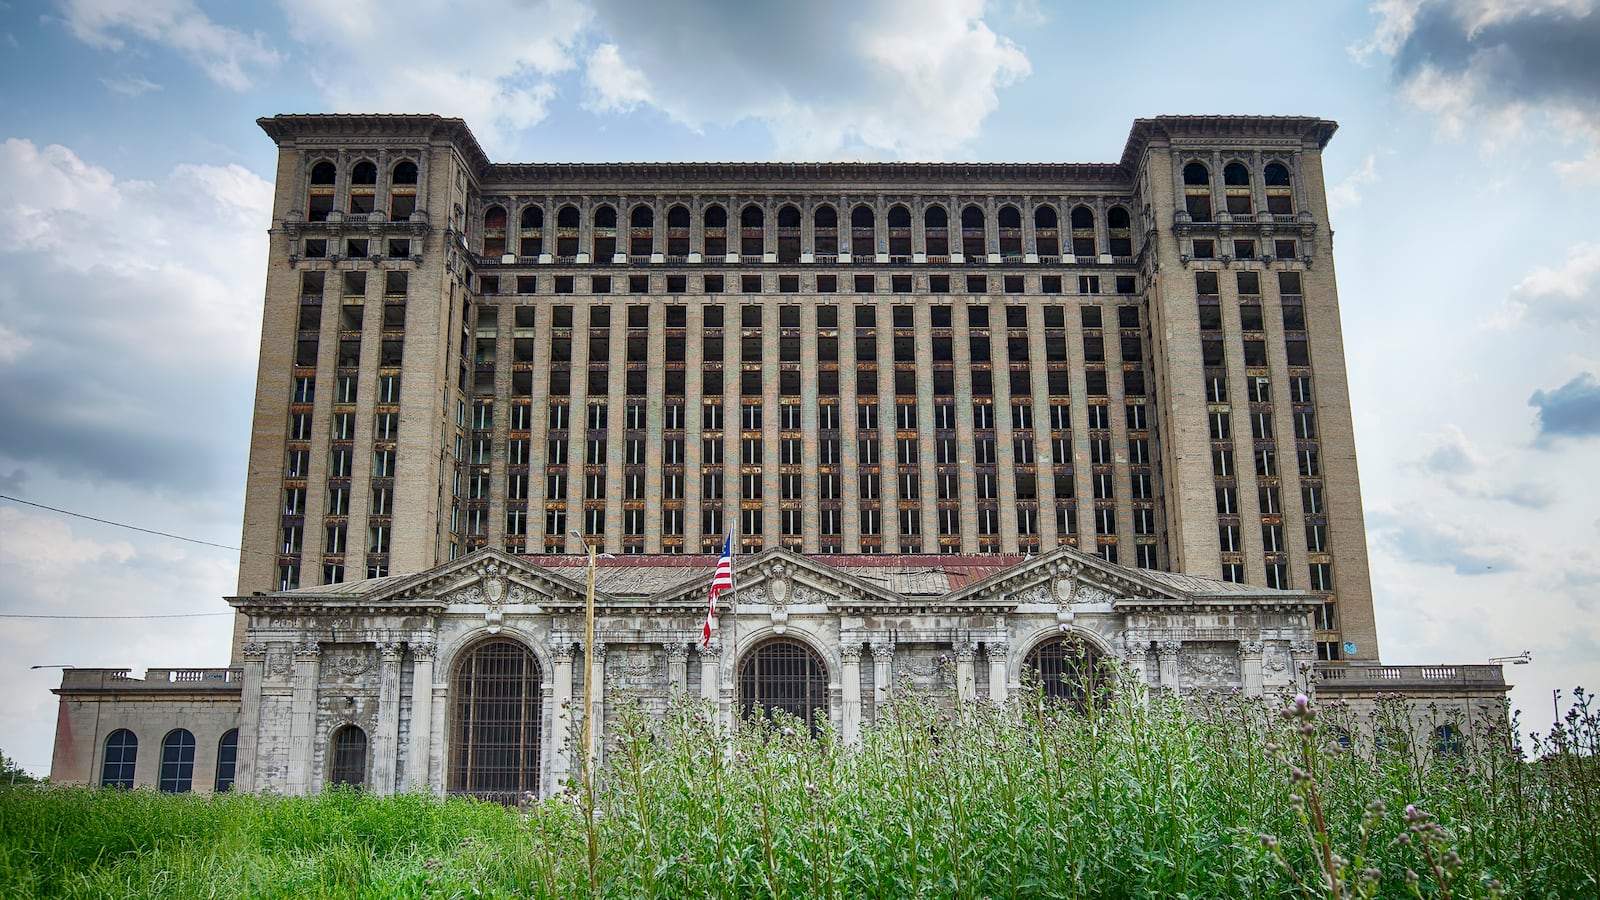 Ford Motor Co. won $208 million in tax breaks to renovate Michigan Central Station, which has become a symbol of Detroit's decline.